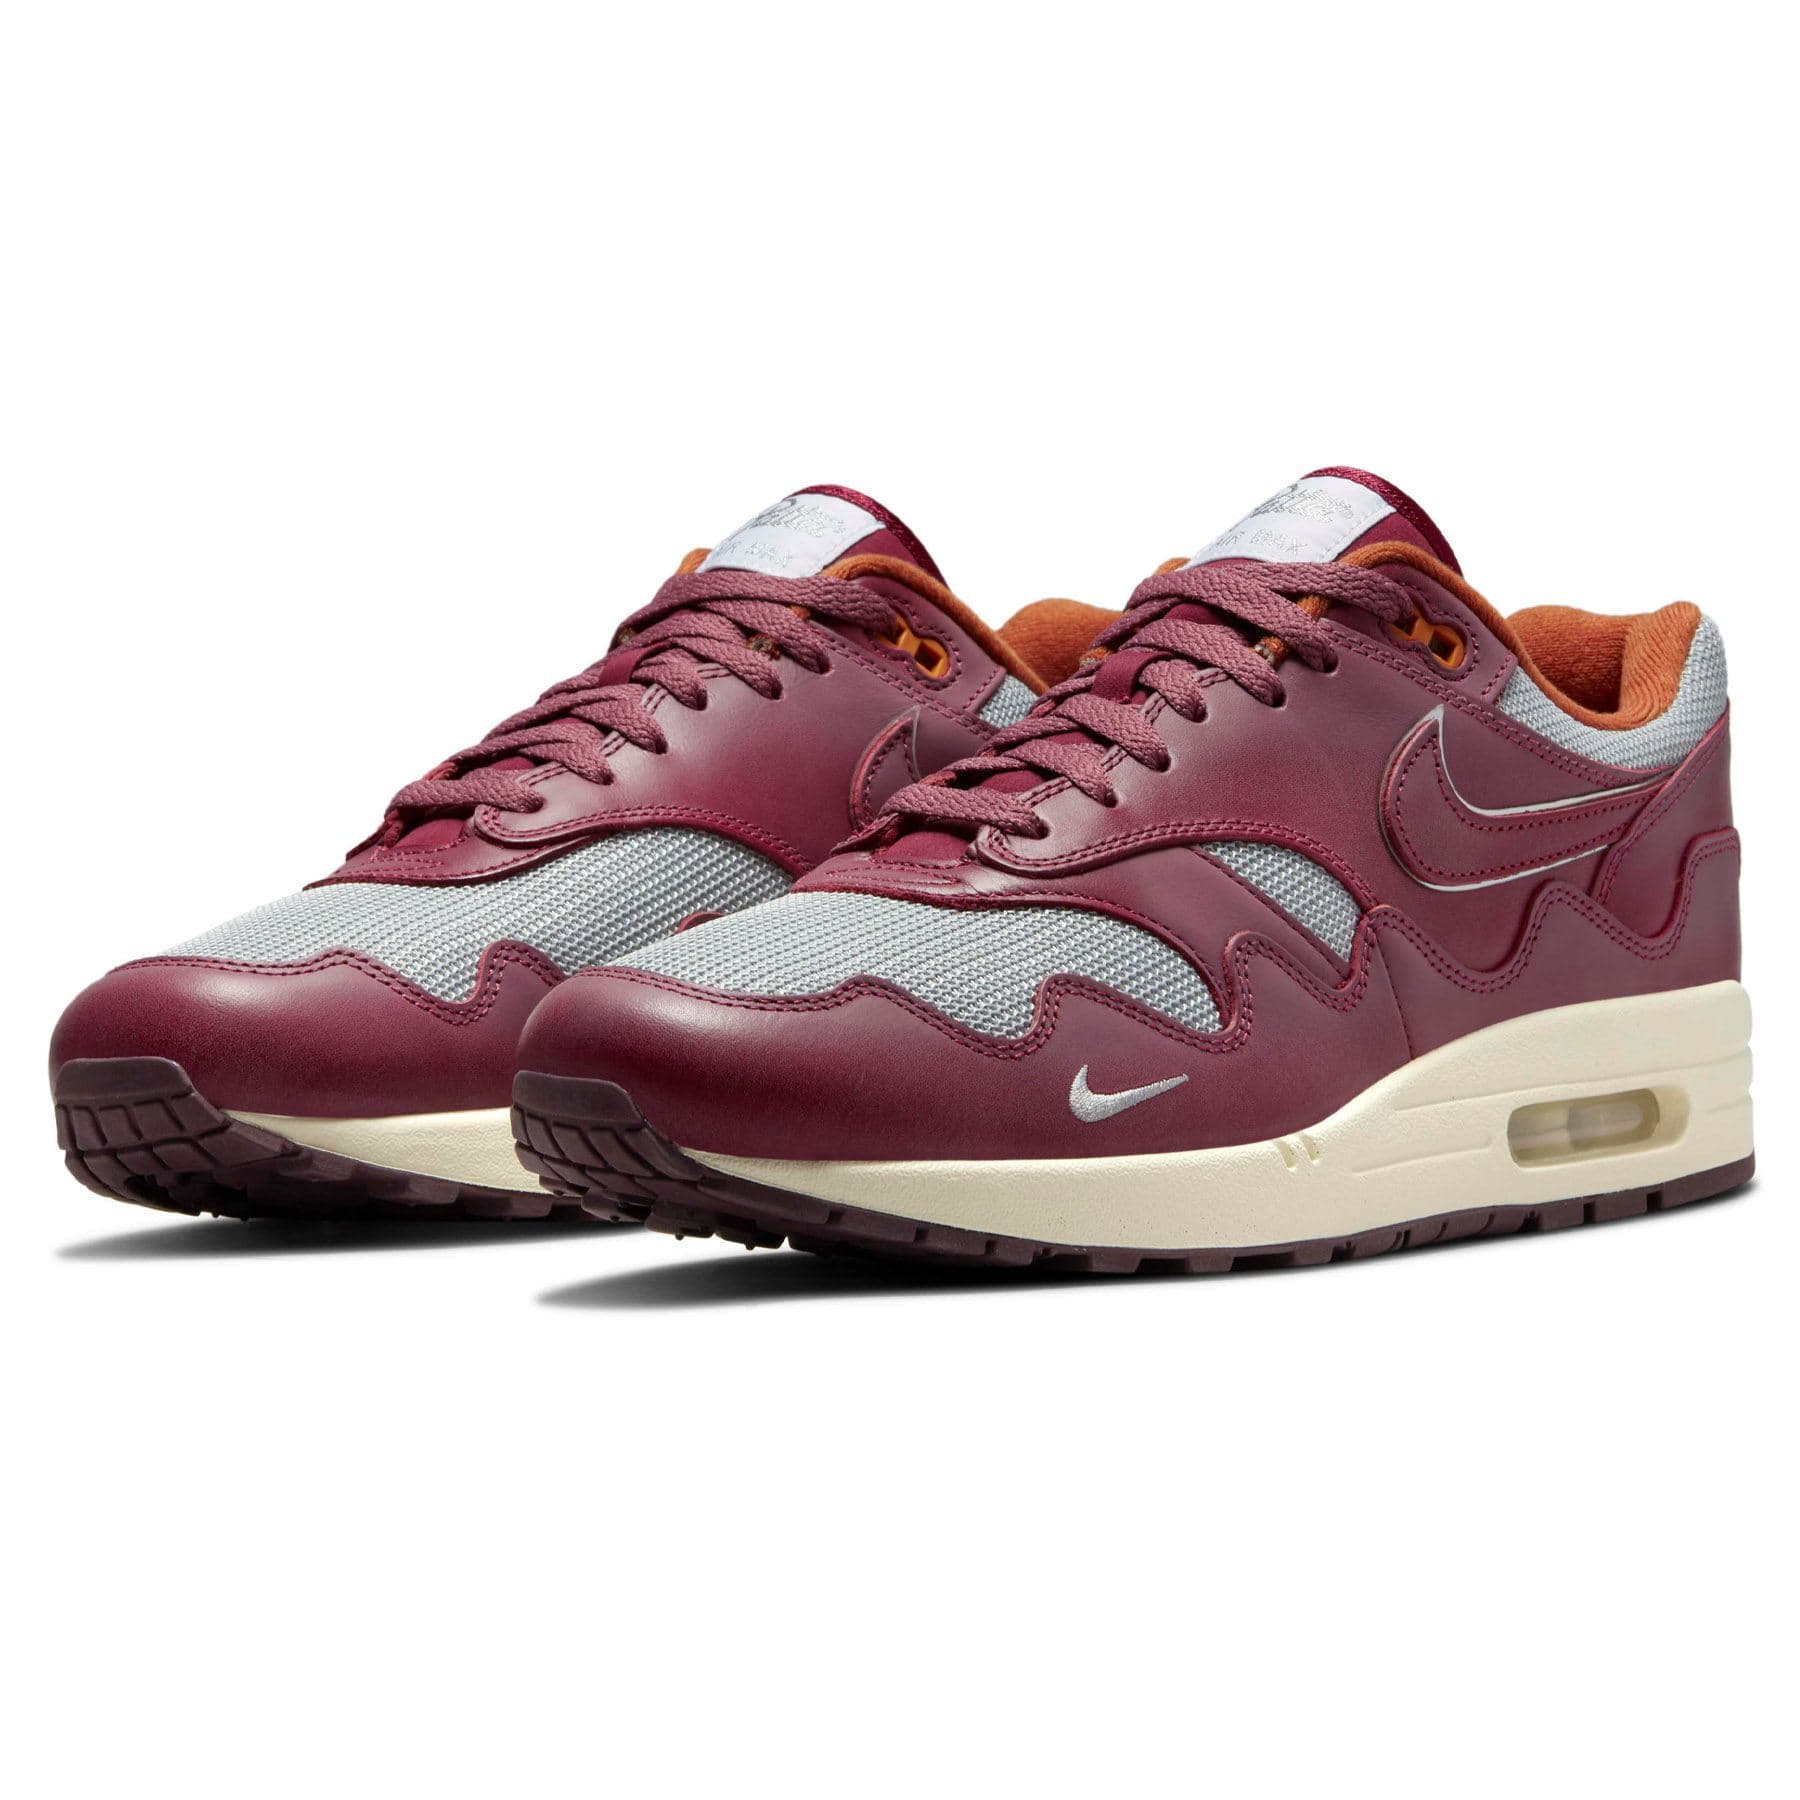 nike air max 1 limited edition kopen